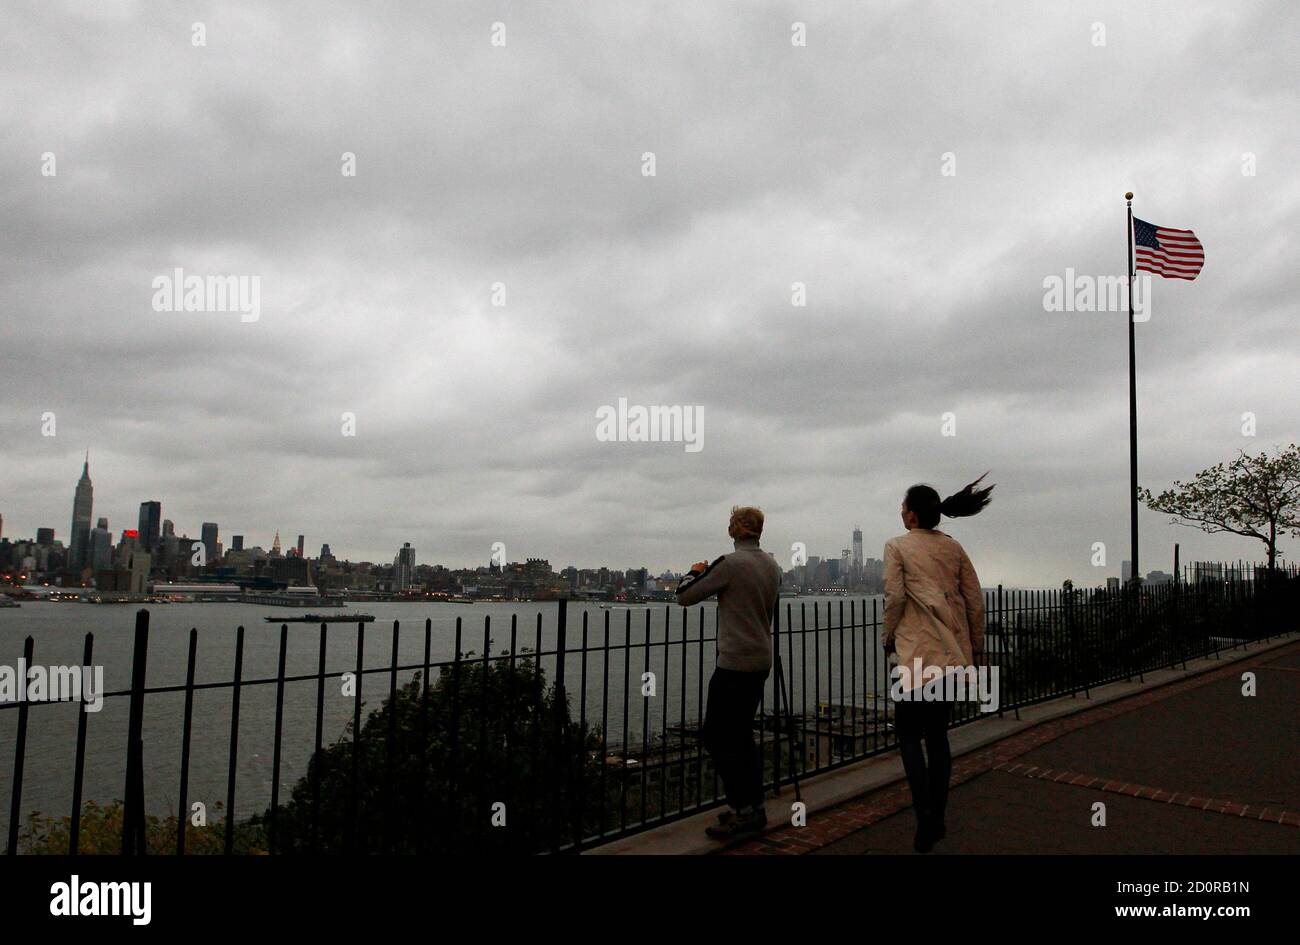 A strong wind blows as Anete Pukite (R) and Martins Alksnis of Latvia look  at the New York skyline along the Hudson River in Weehawken, New Jersey,  October 28, 2012. Tens of